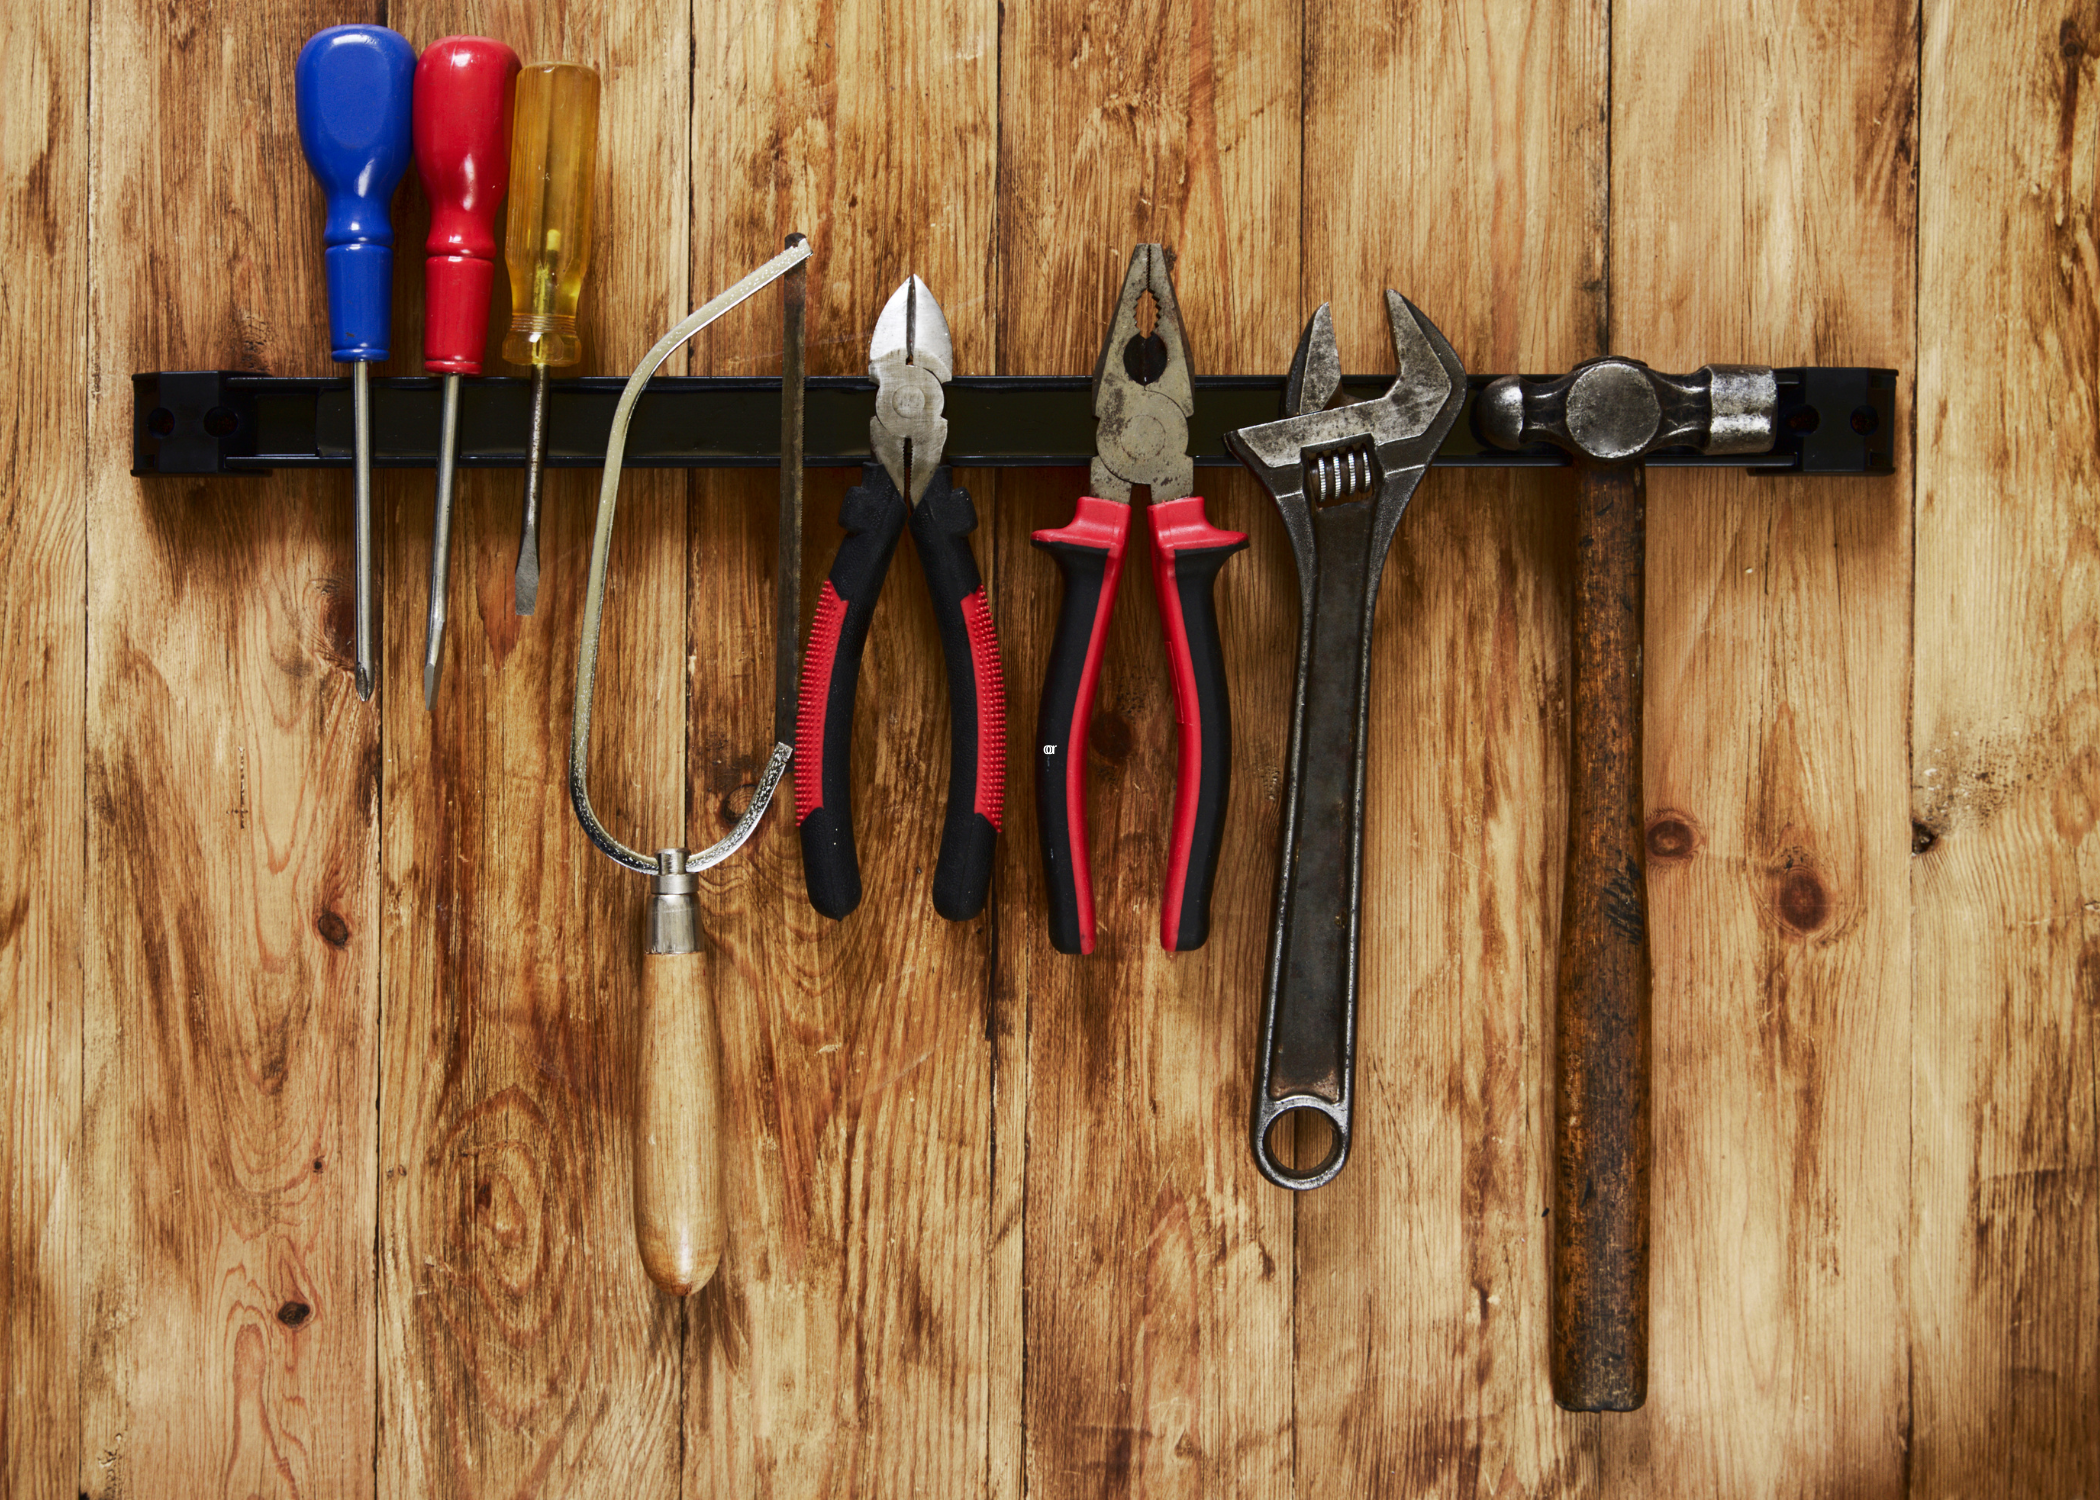 7 Innovative Ways to Organize and Store Your Tools